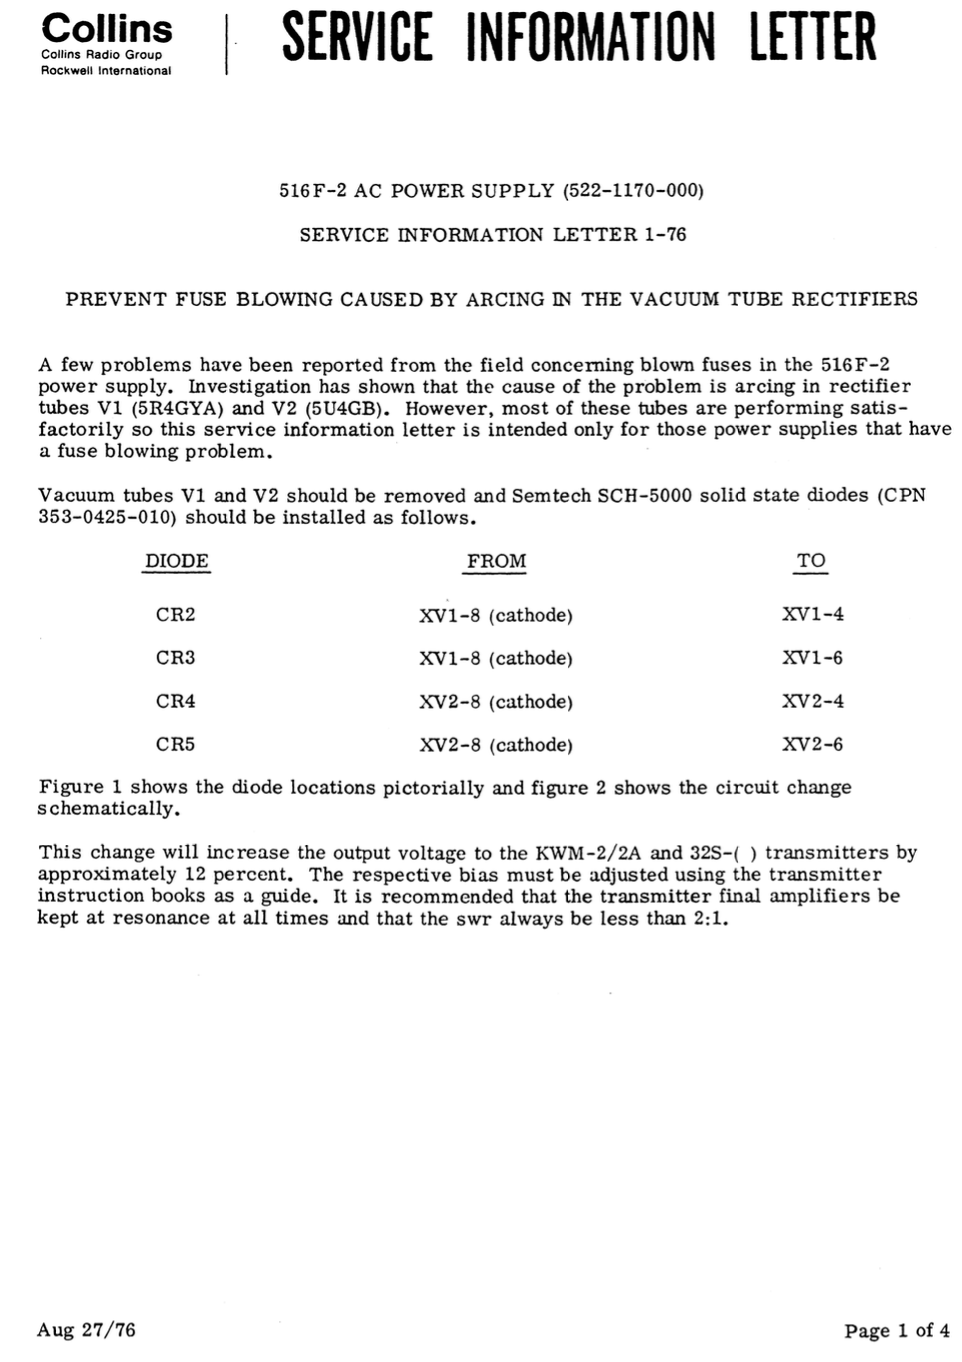 Collins 516F-2 AC Power Supply - Service Information Letter 1-76 (1976-08)